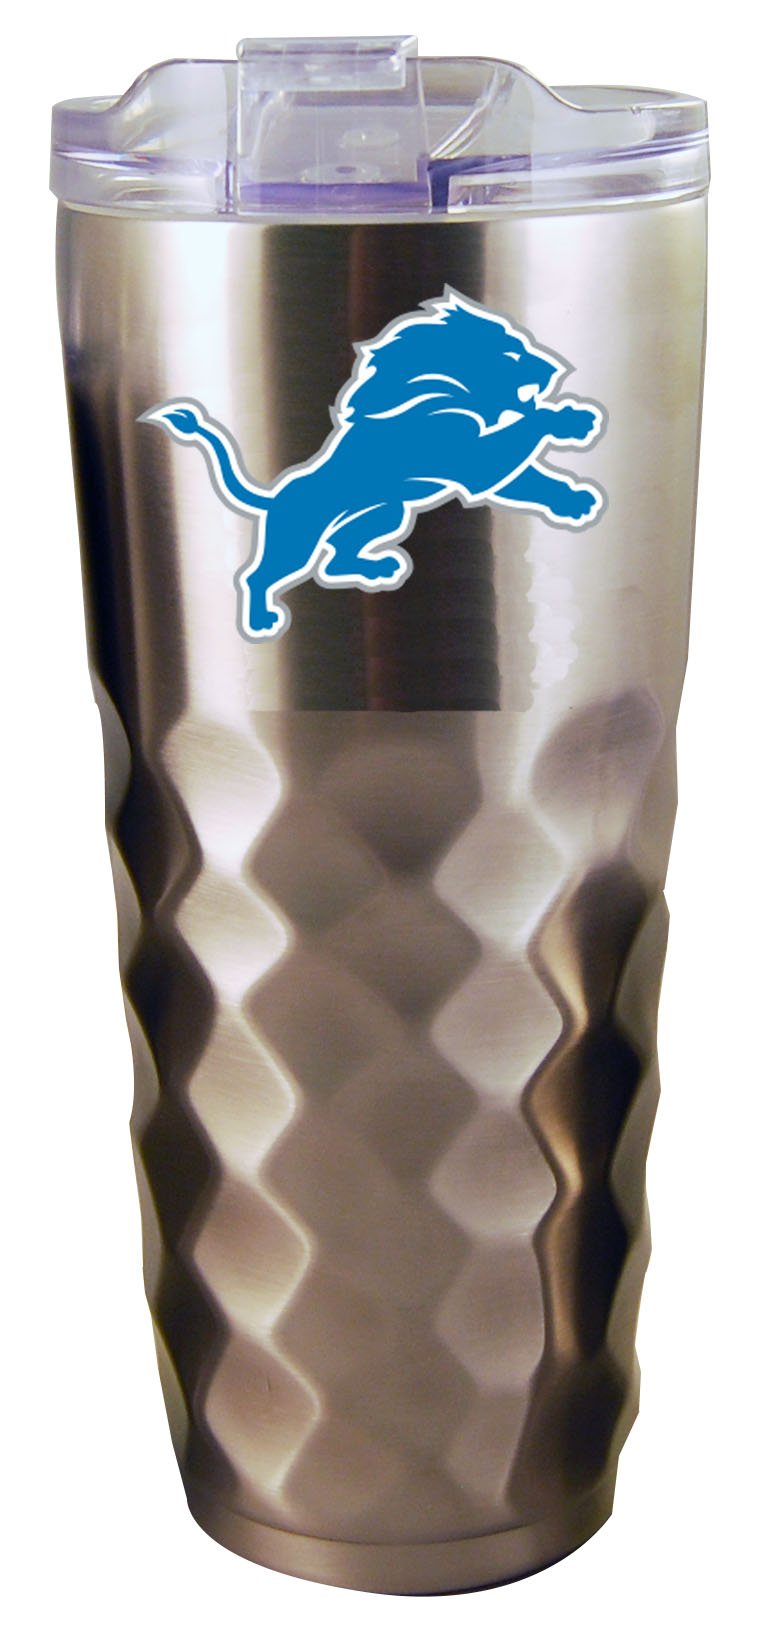 32OZ SS DIAMD TMBLR LIONS
CurrentProduct, Detroit Lions, DLI, Drinkware_category_All, NFL
The Memory Company